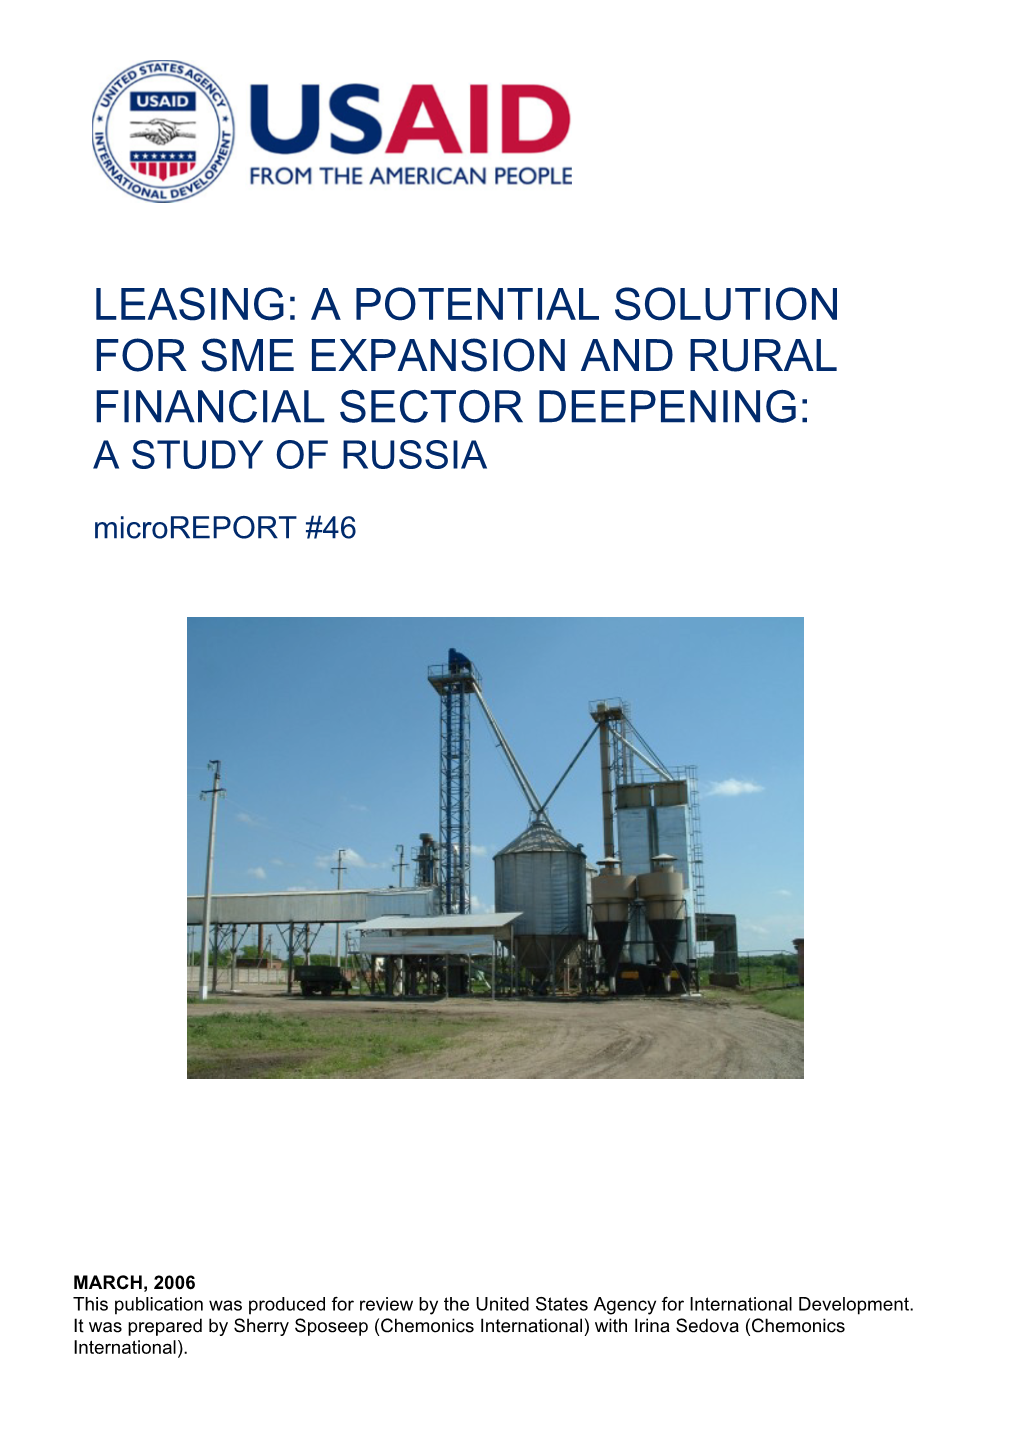 Leasing: a Potential Solution for Sme Expansion and Rural Financial Sector Deepening: a Study of Russia